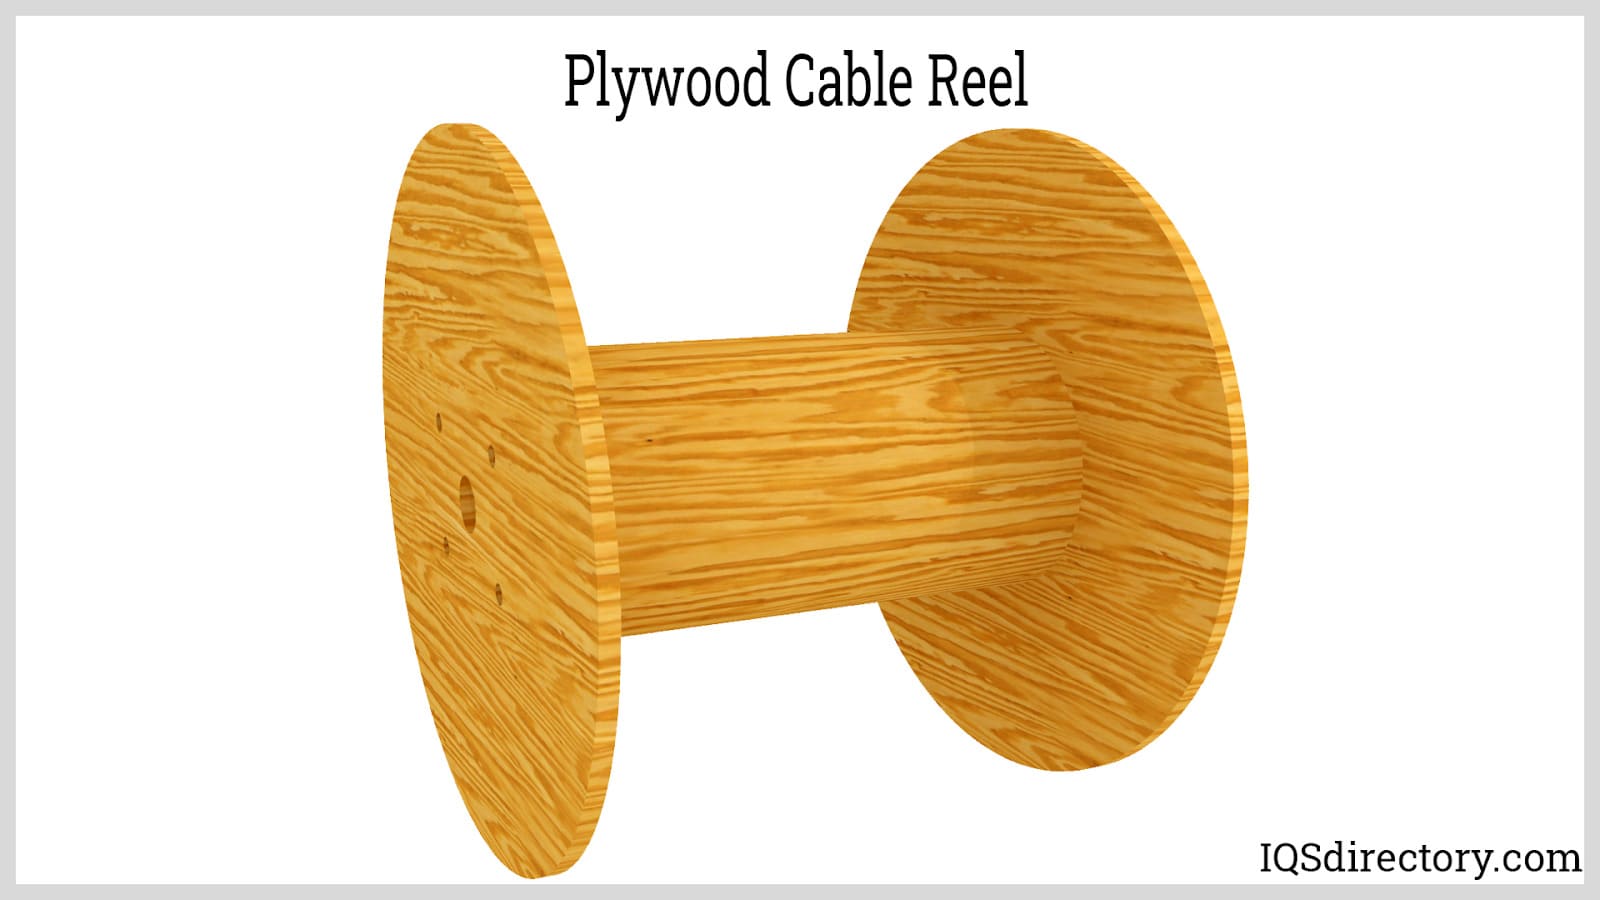 Plywood Cable Reel